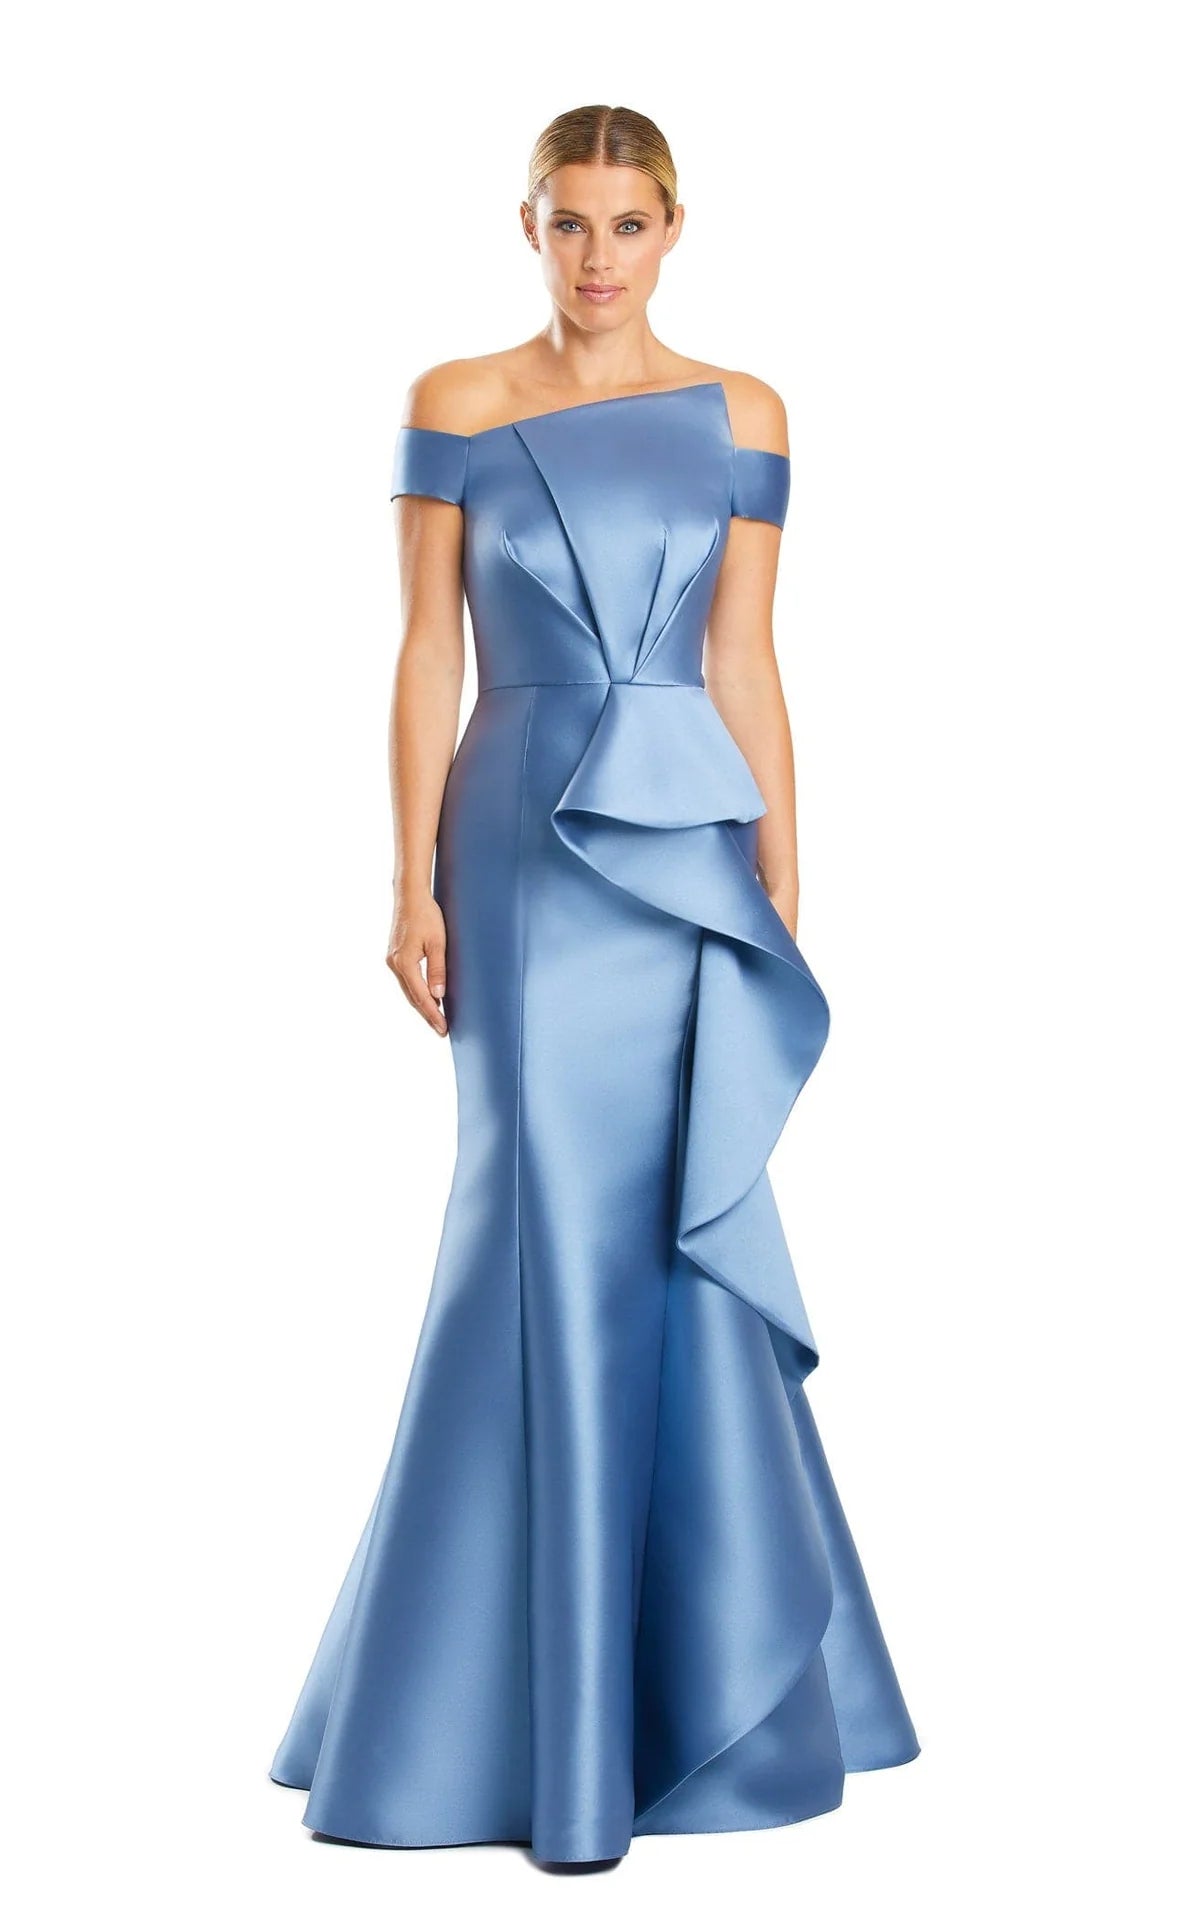 Draped Bodice Gown